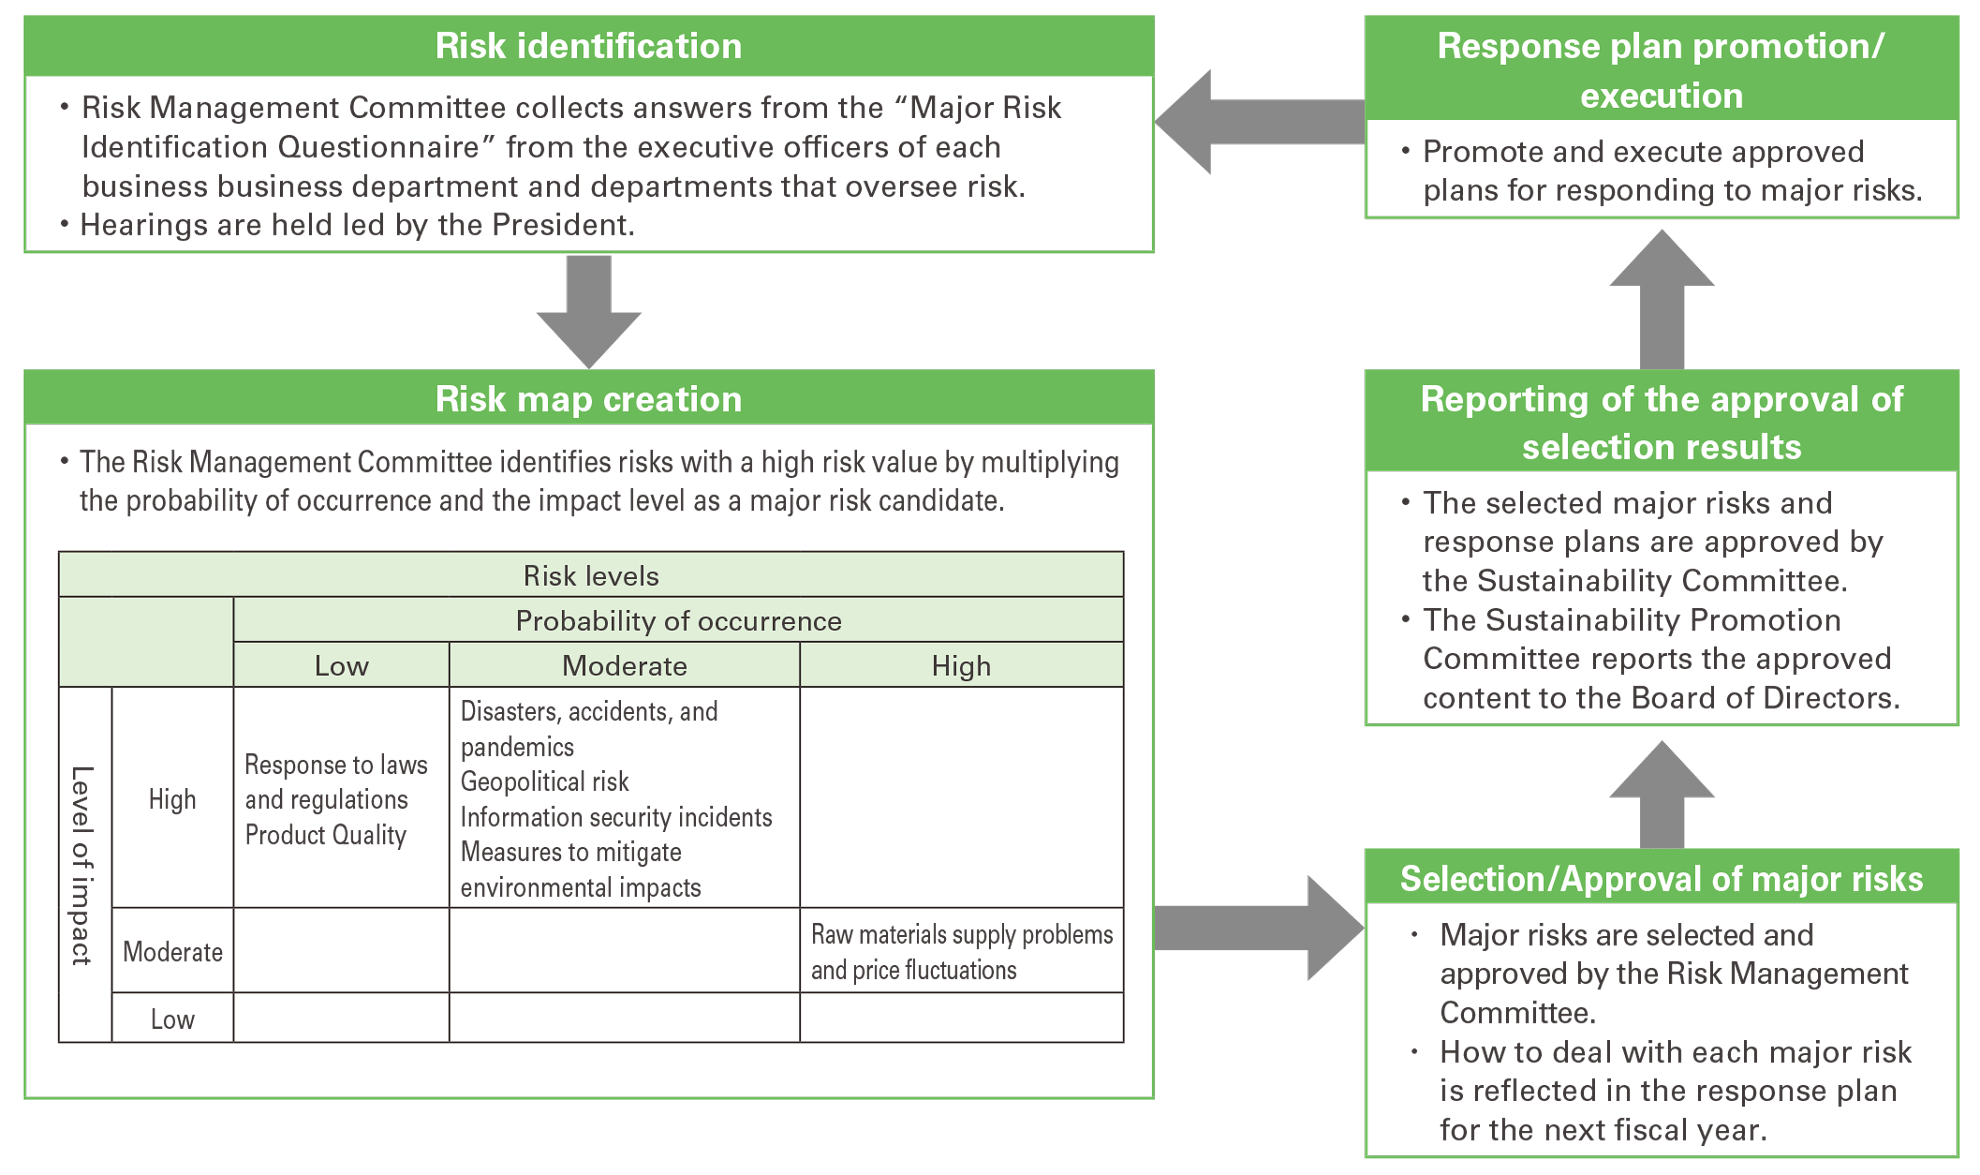 Major Risk Selection and Approval Process chart